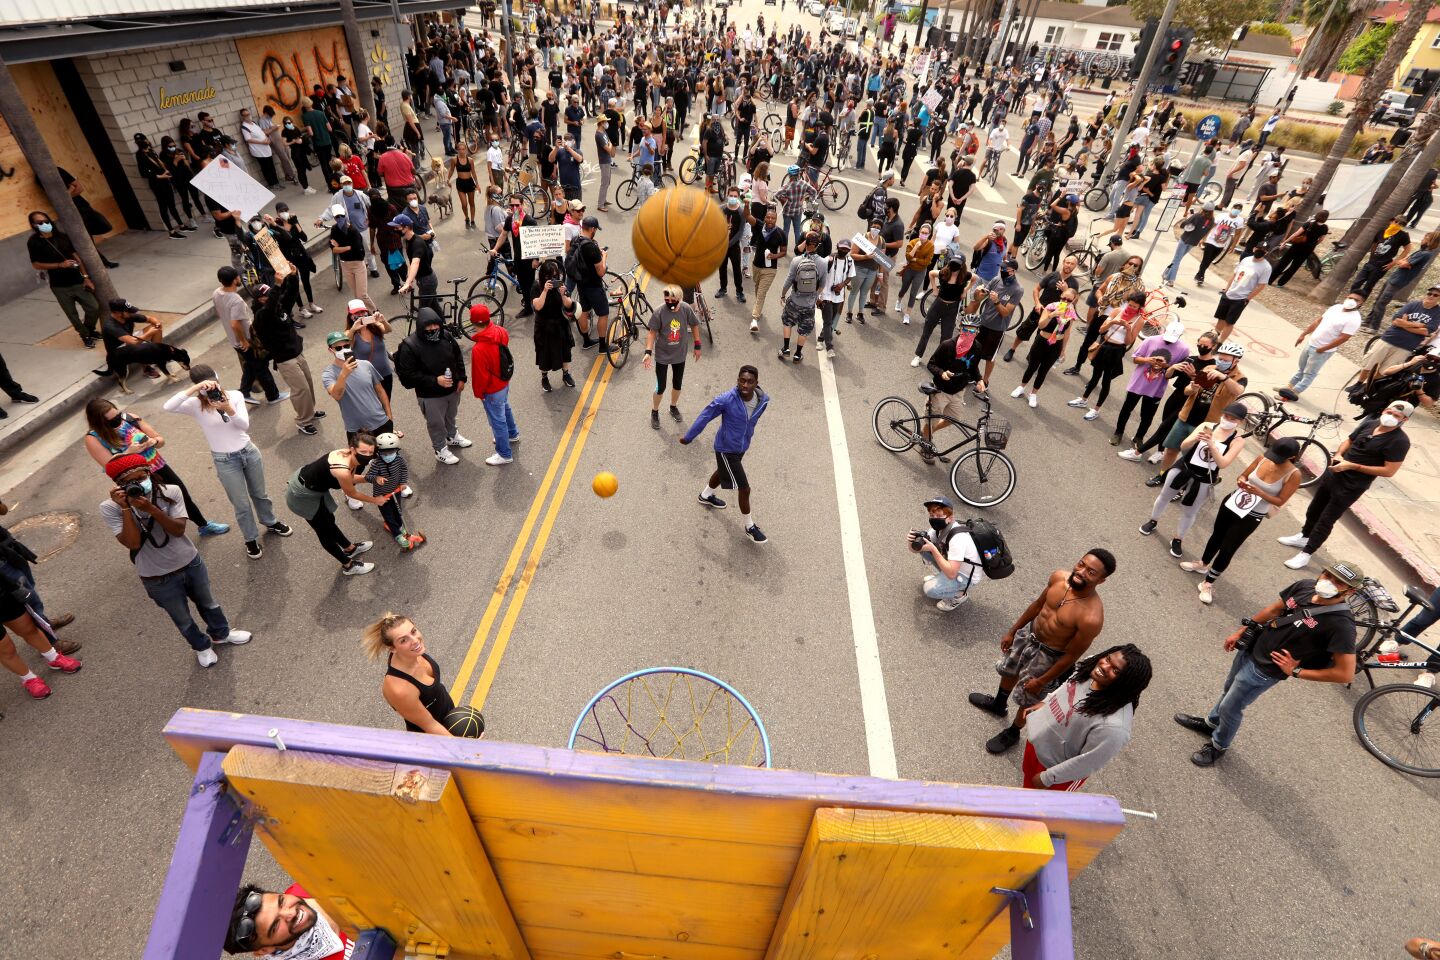 Protesters shoot hoops while taking a break from marching